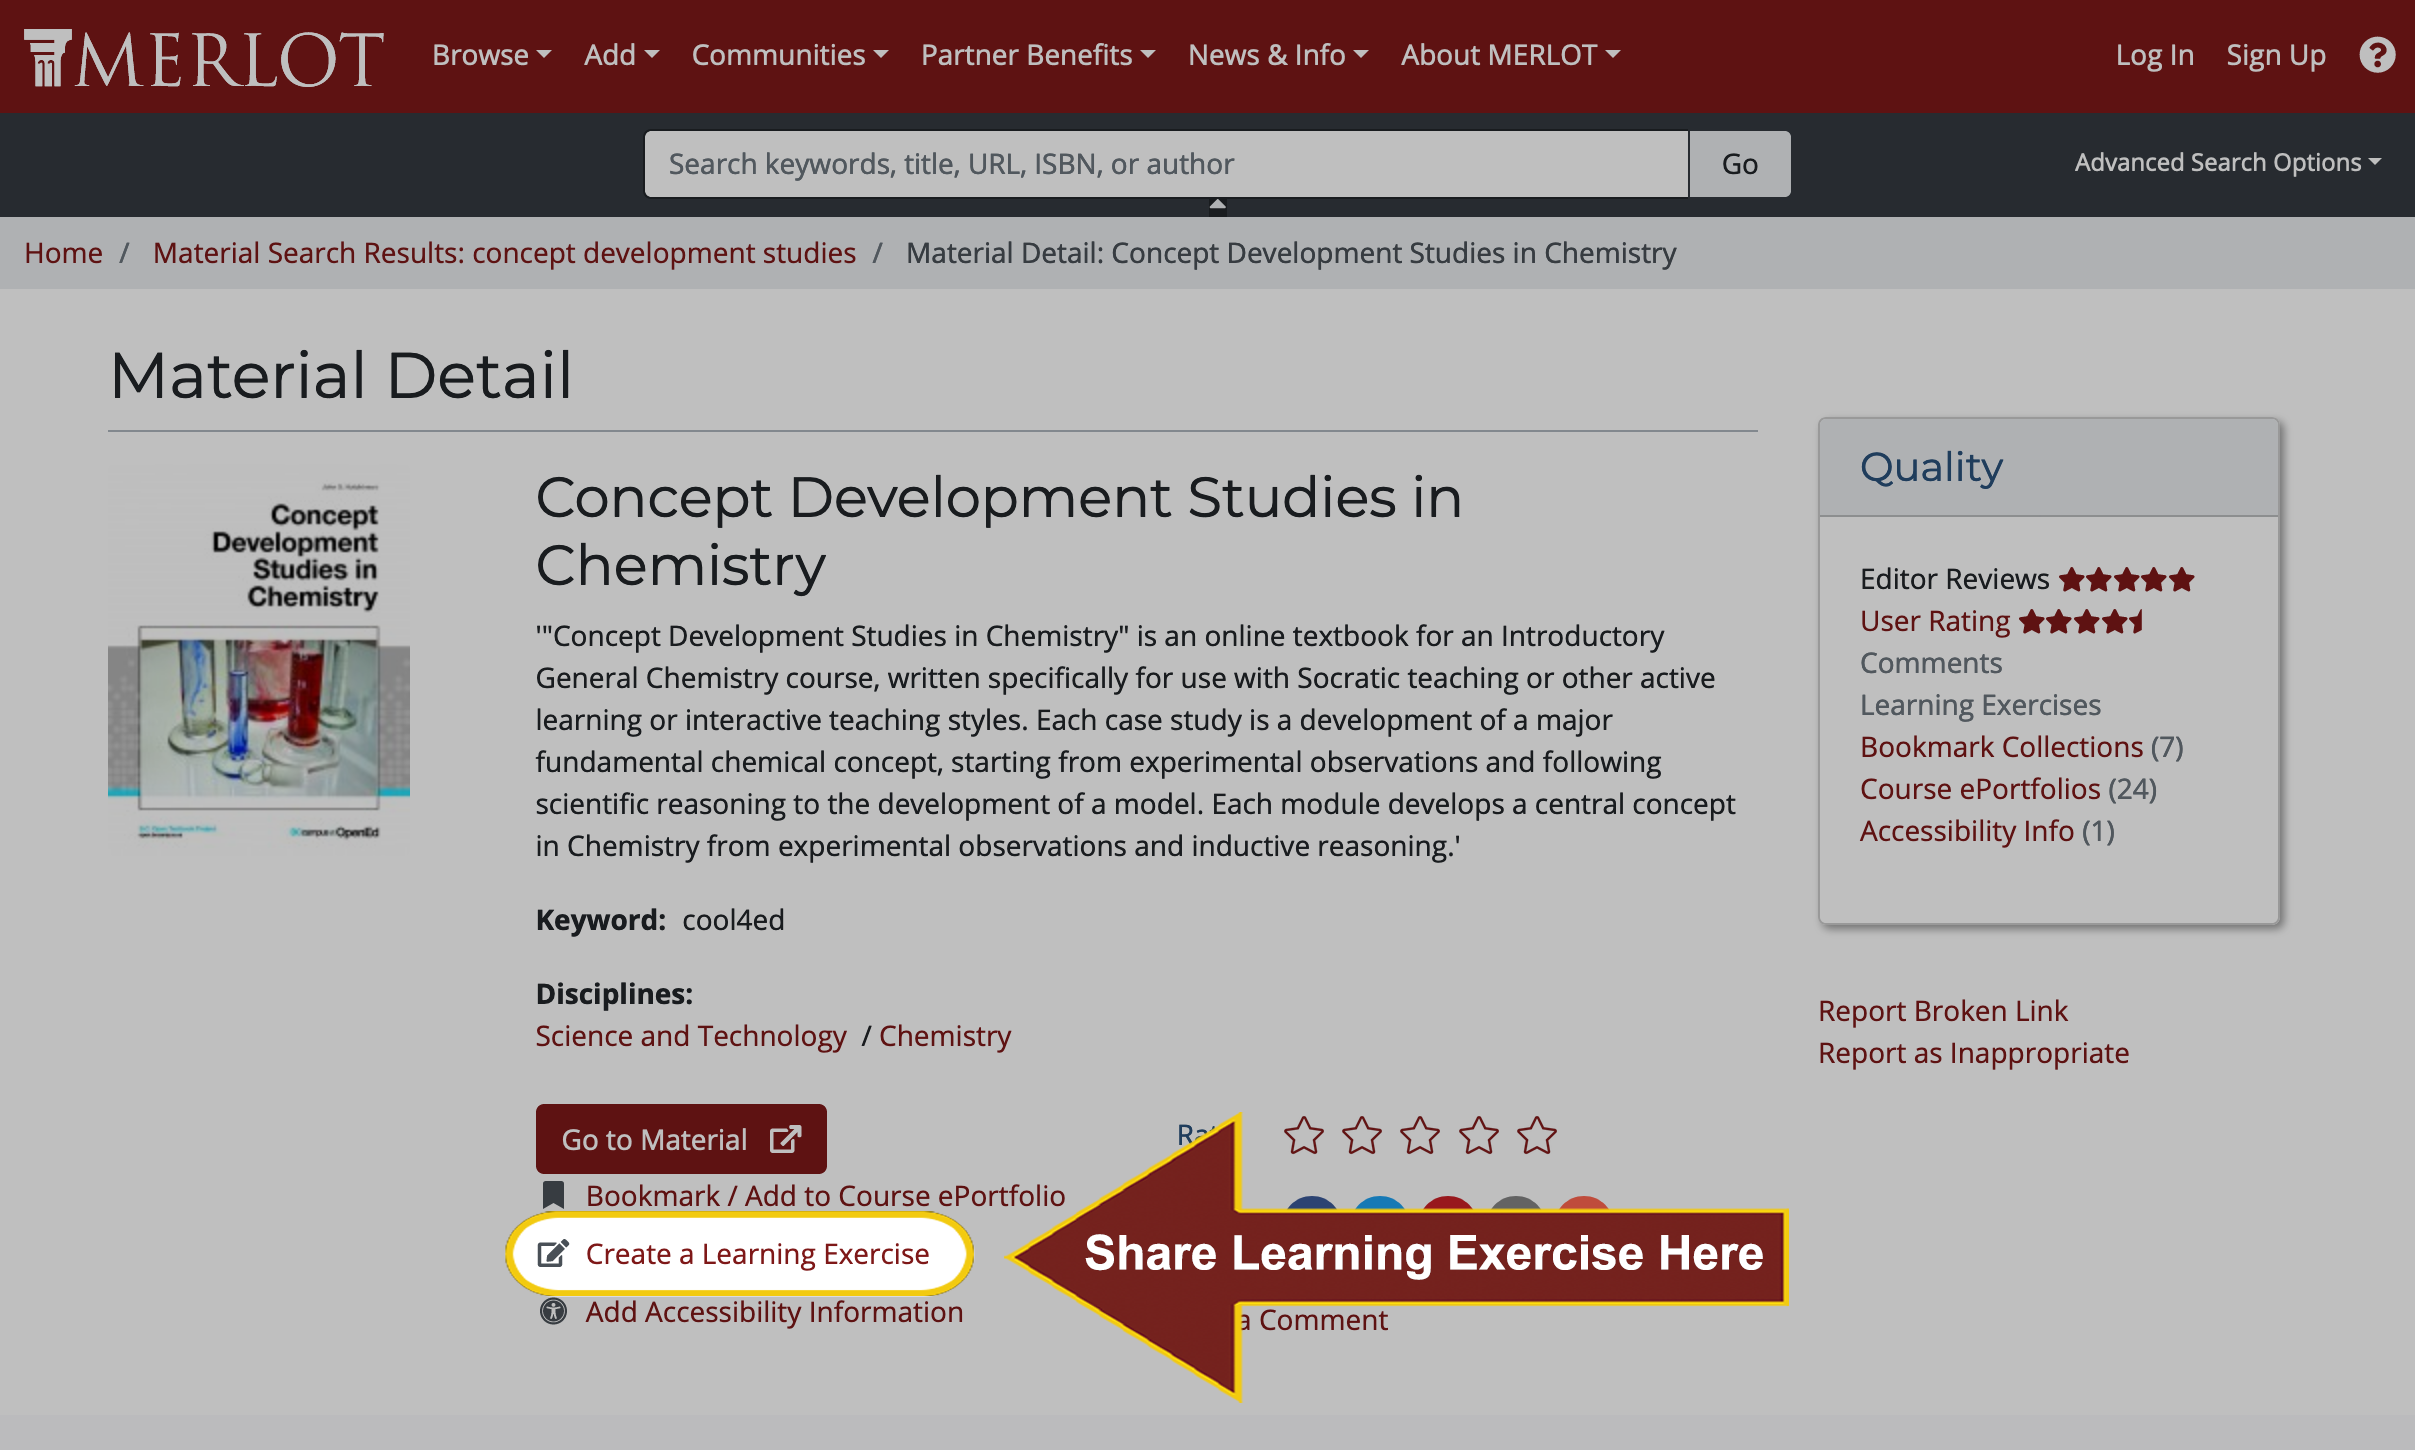 Screenshot from MERLOT.org showing option to share a learning exercise